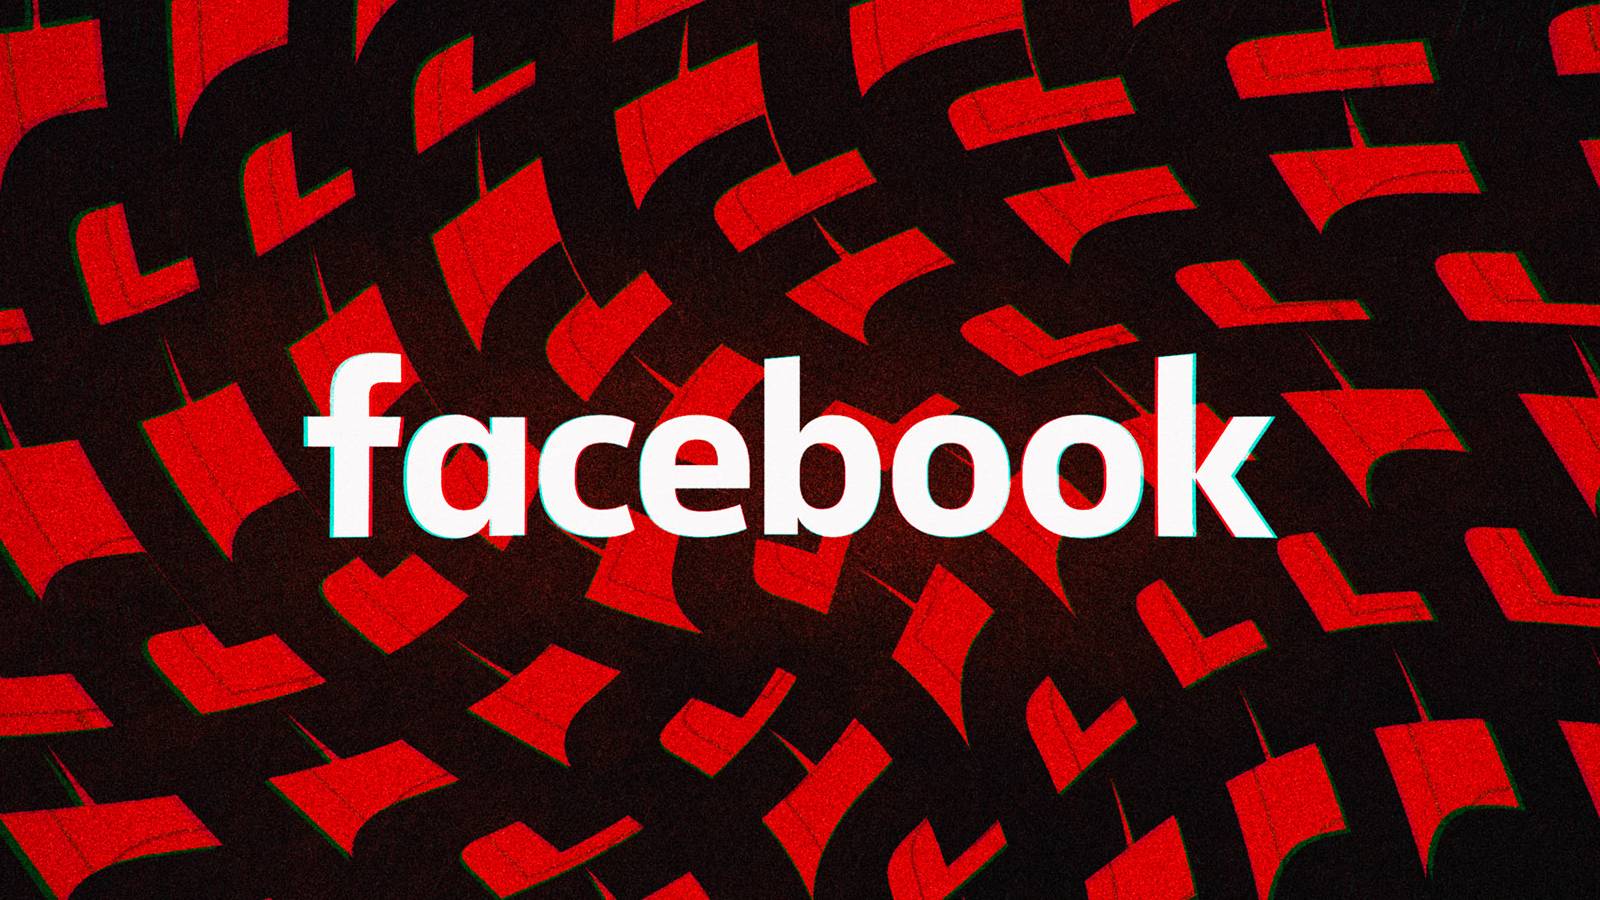 The New Facebook Update and What Changes It Brings to People